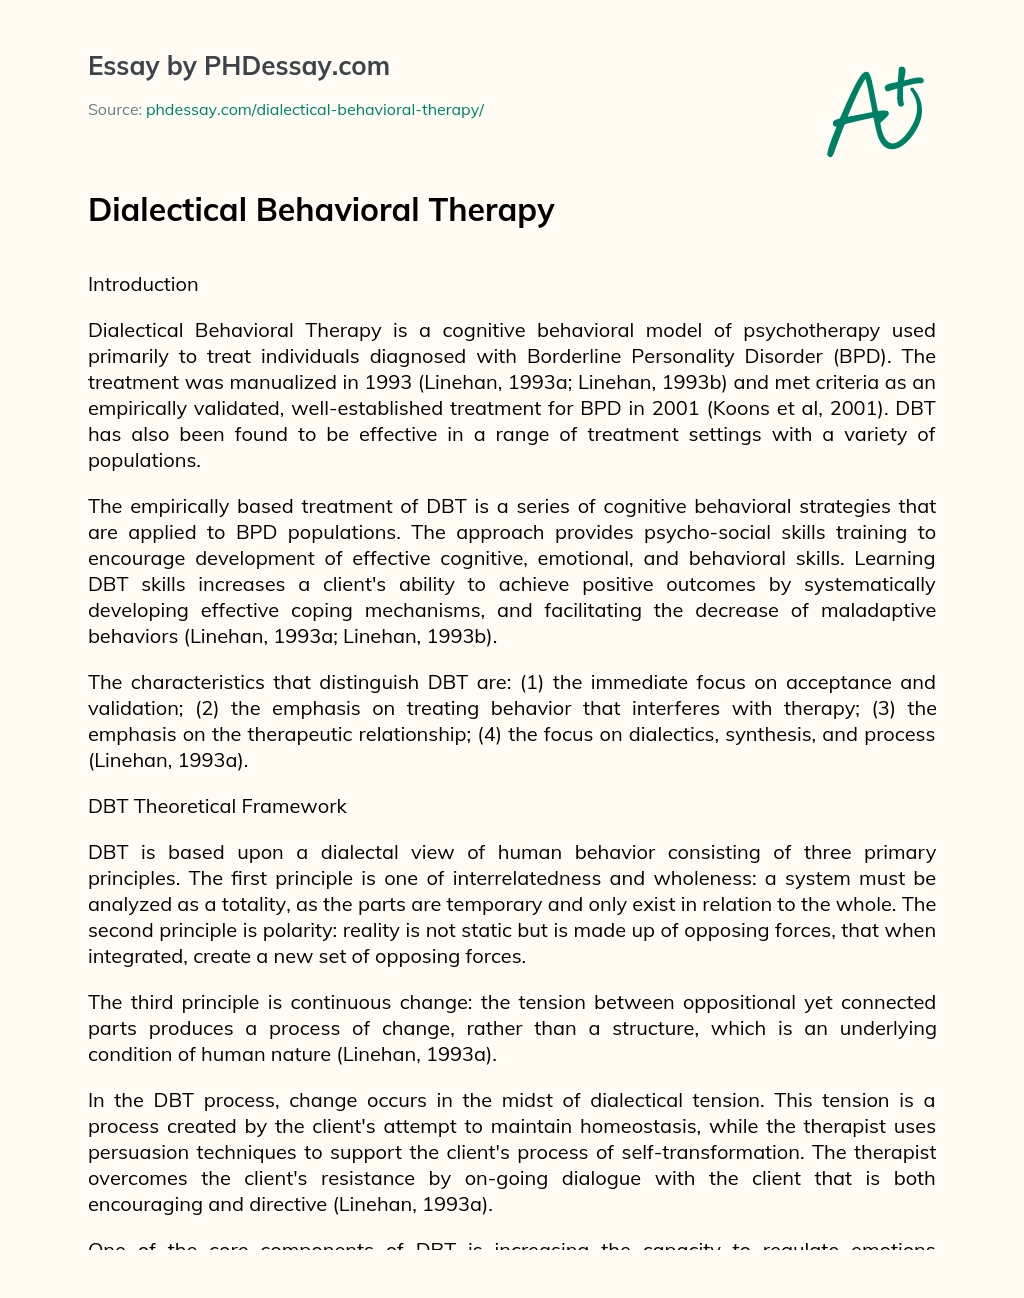 Dialectical Behavioral Therapy essay